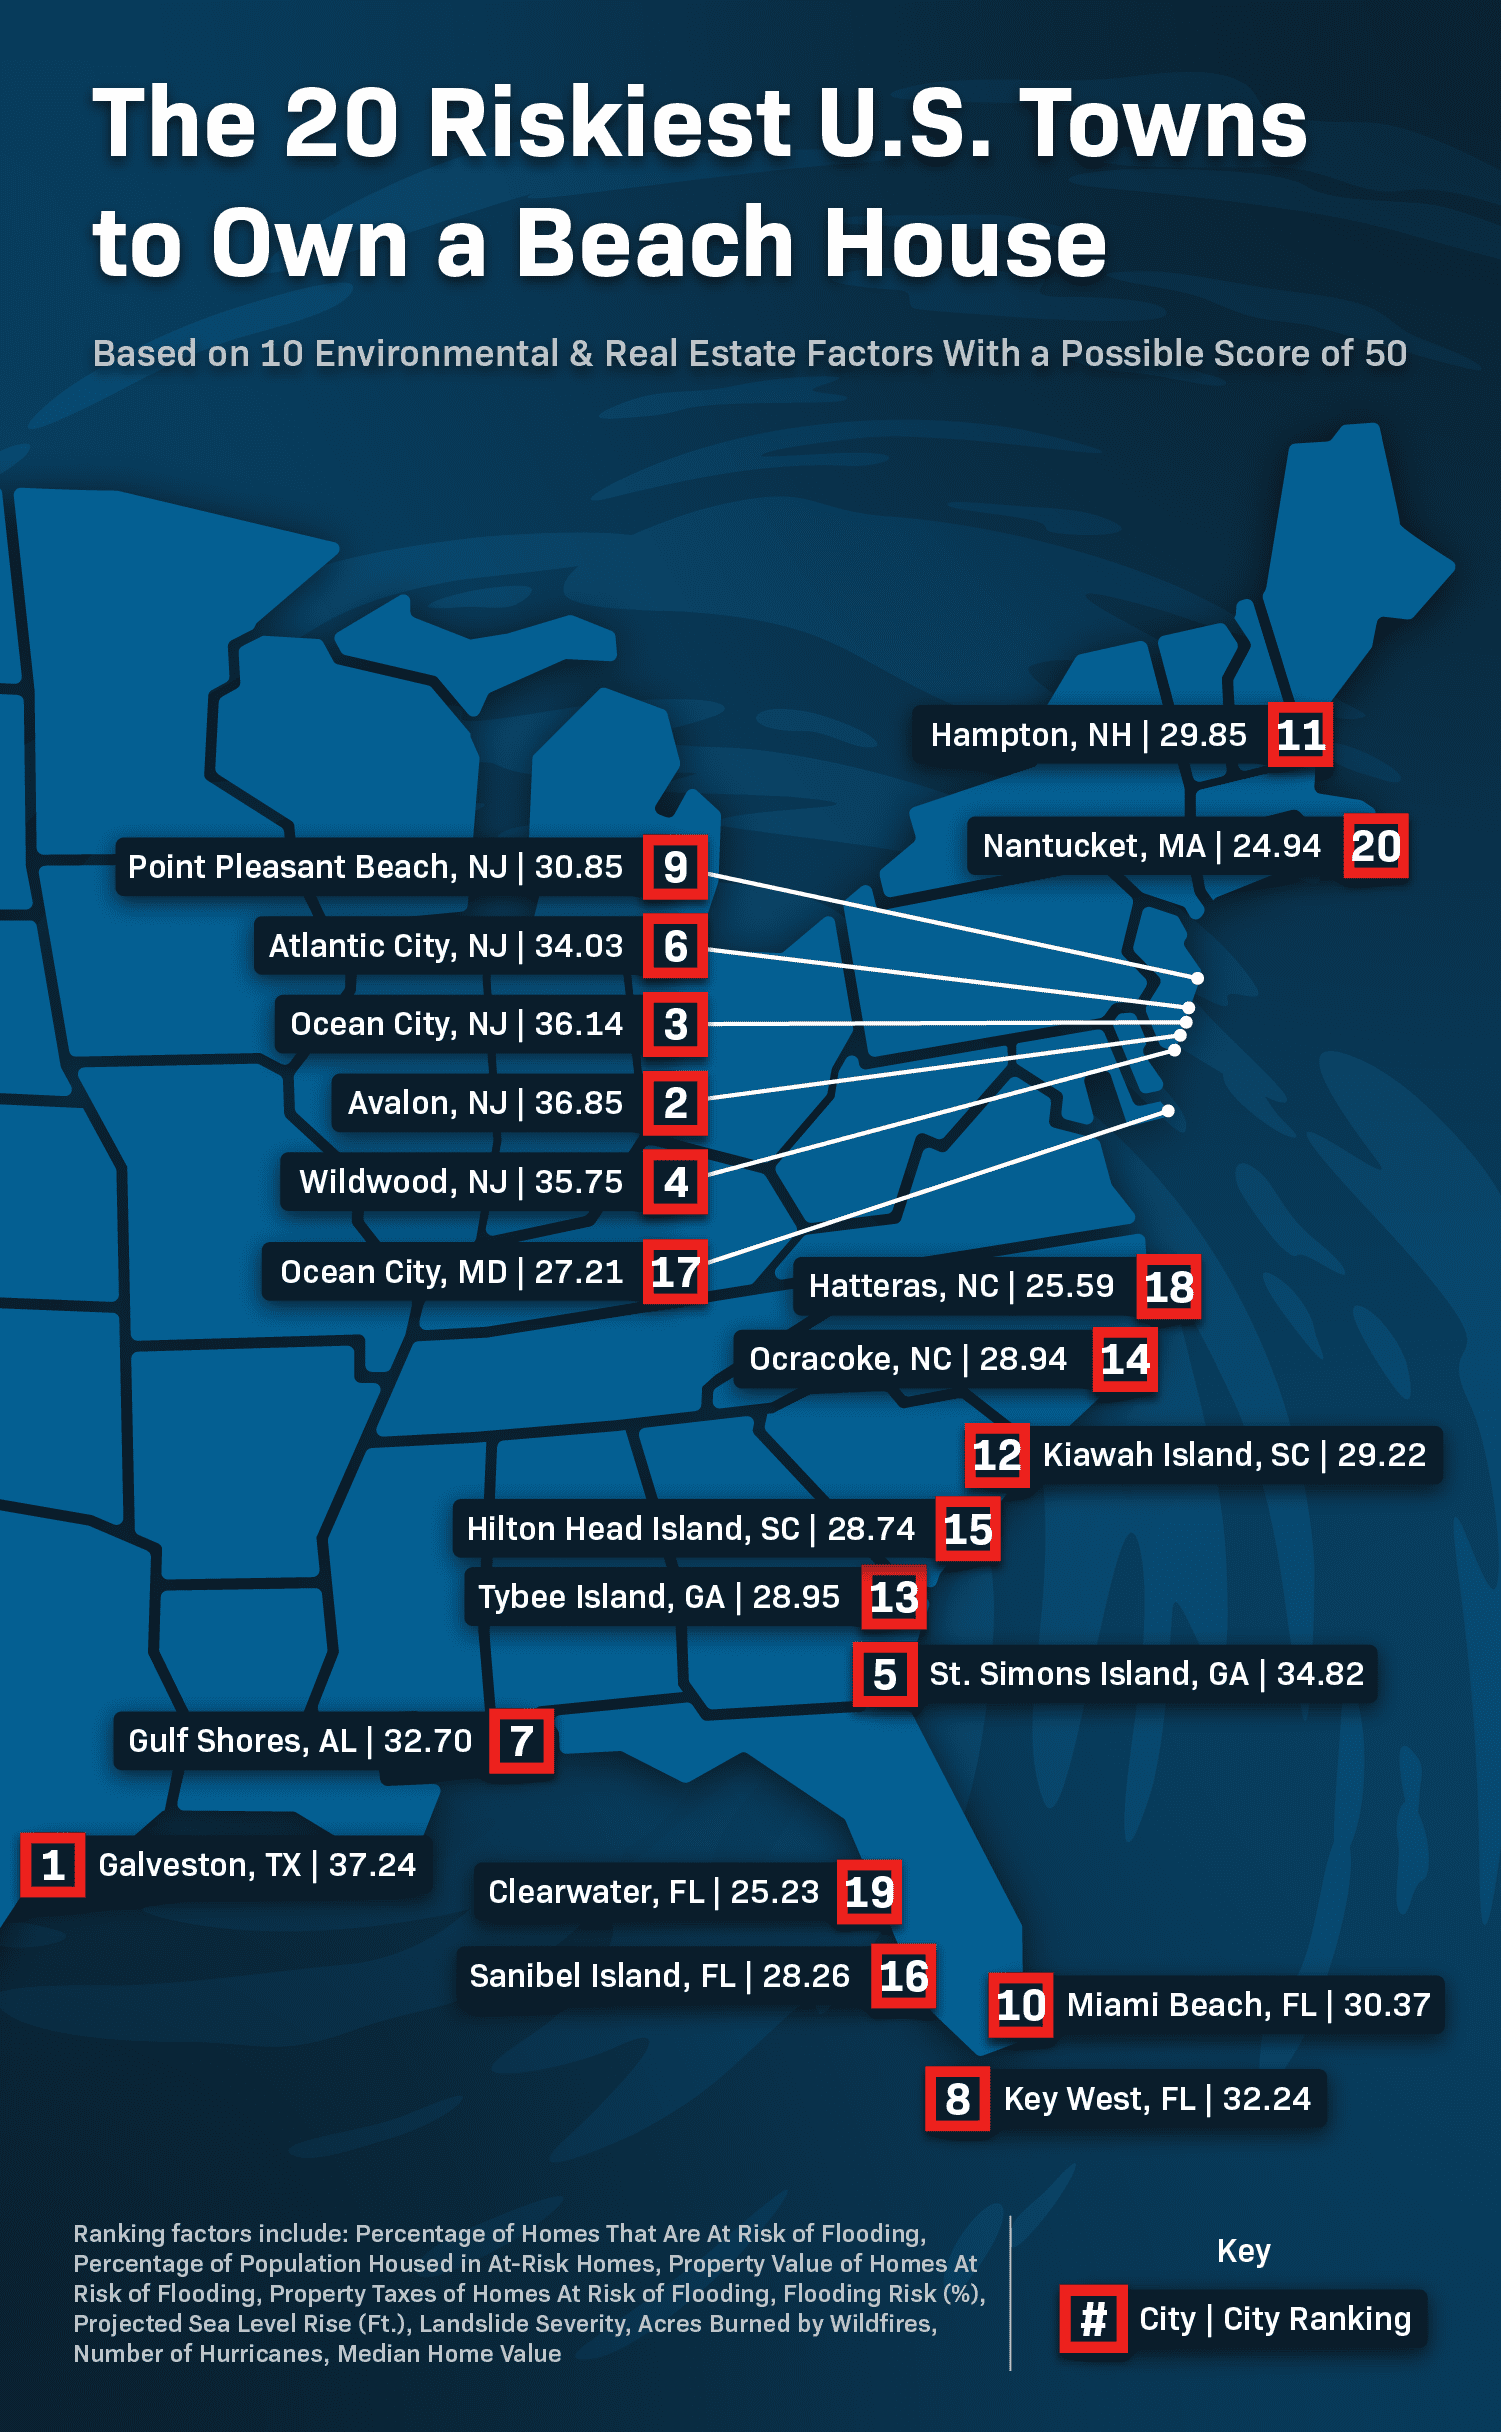 Graphic indicating the riskiest U.S. towns to own a beach house